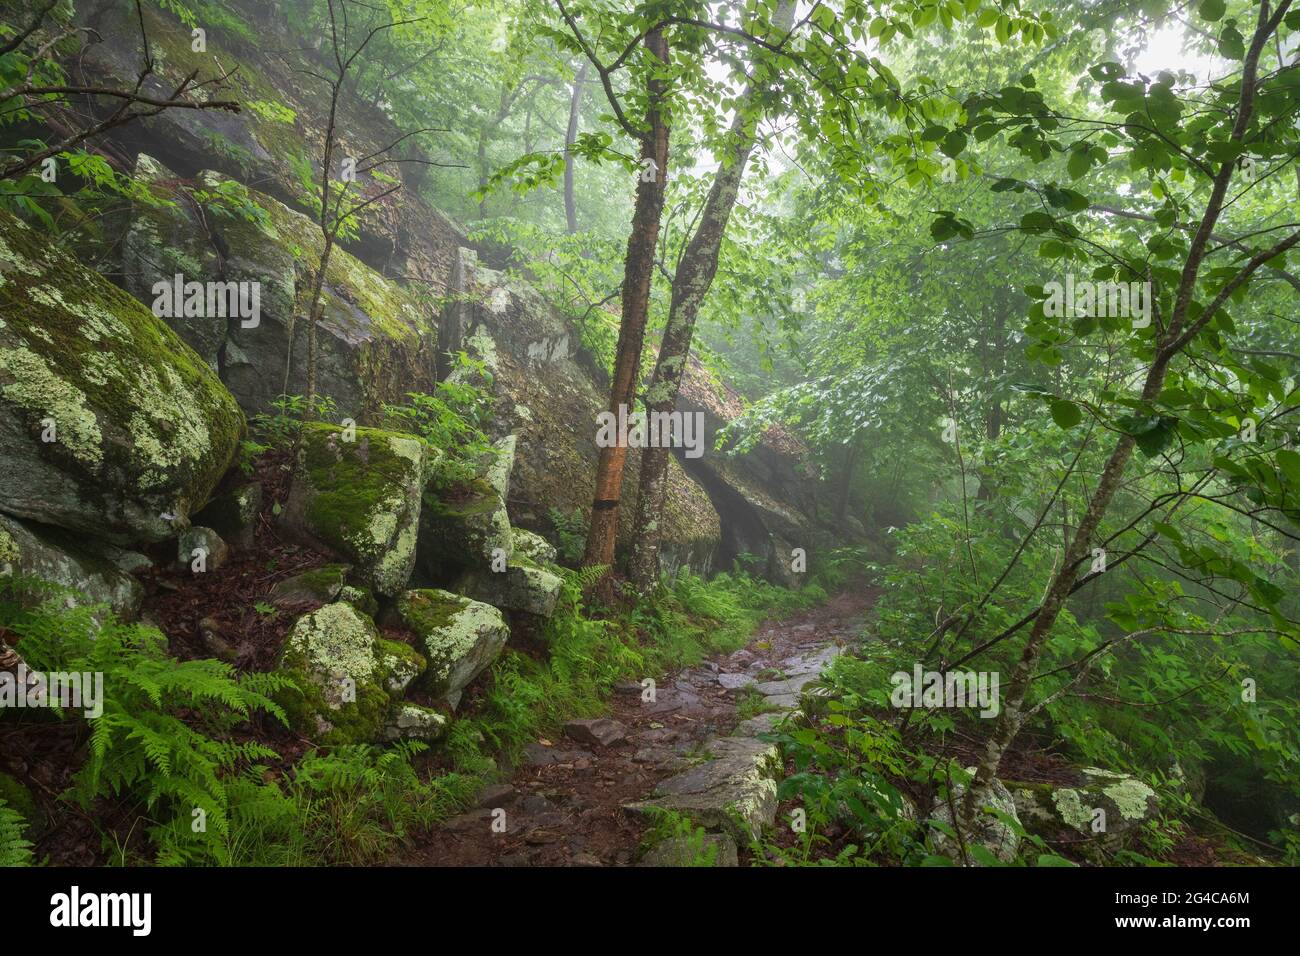 The Appalachian Trail surrounded by fog, lush green ferns, and boulders in Shenandoah National Park, Virginia, United States Stock Photo